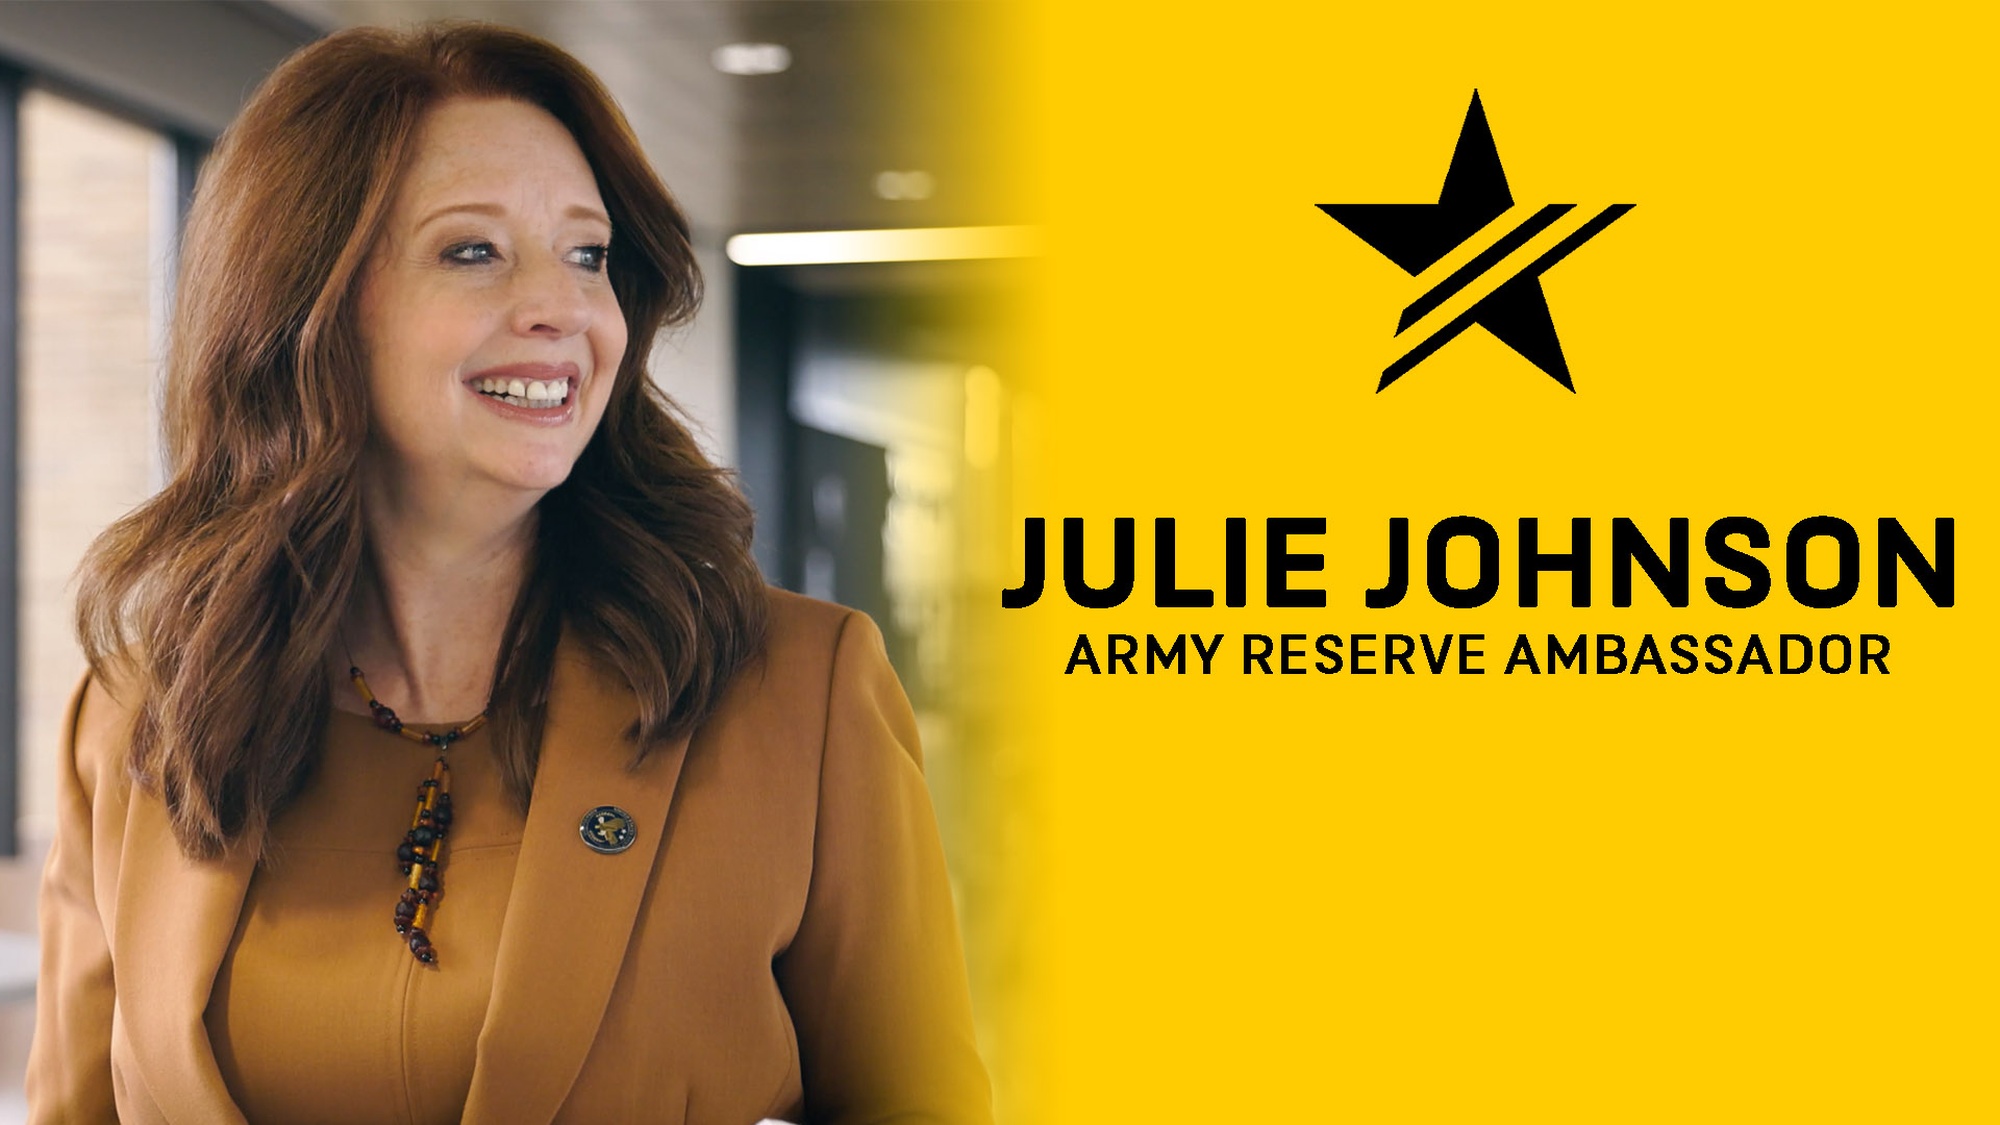 Illinois Army Reserve Ambassador Julie Johnson shares her story about how you can still serve your country as an Ambassador, even without prior military service history. Her grandfather was a great motivator for her, and she talks about how being an ARA is her way of honoring him since his passing. As a chiropractor, she shares how her passion for helping others goes hand in hand with her role as an ambassador, and encourages other like-minded individuals to consider this path. Directed By: Tim Yao; Camera: Colton Huston